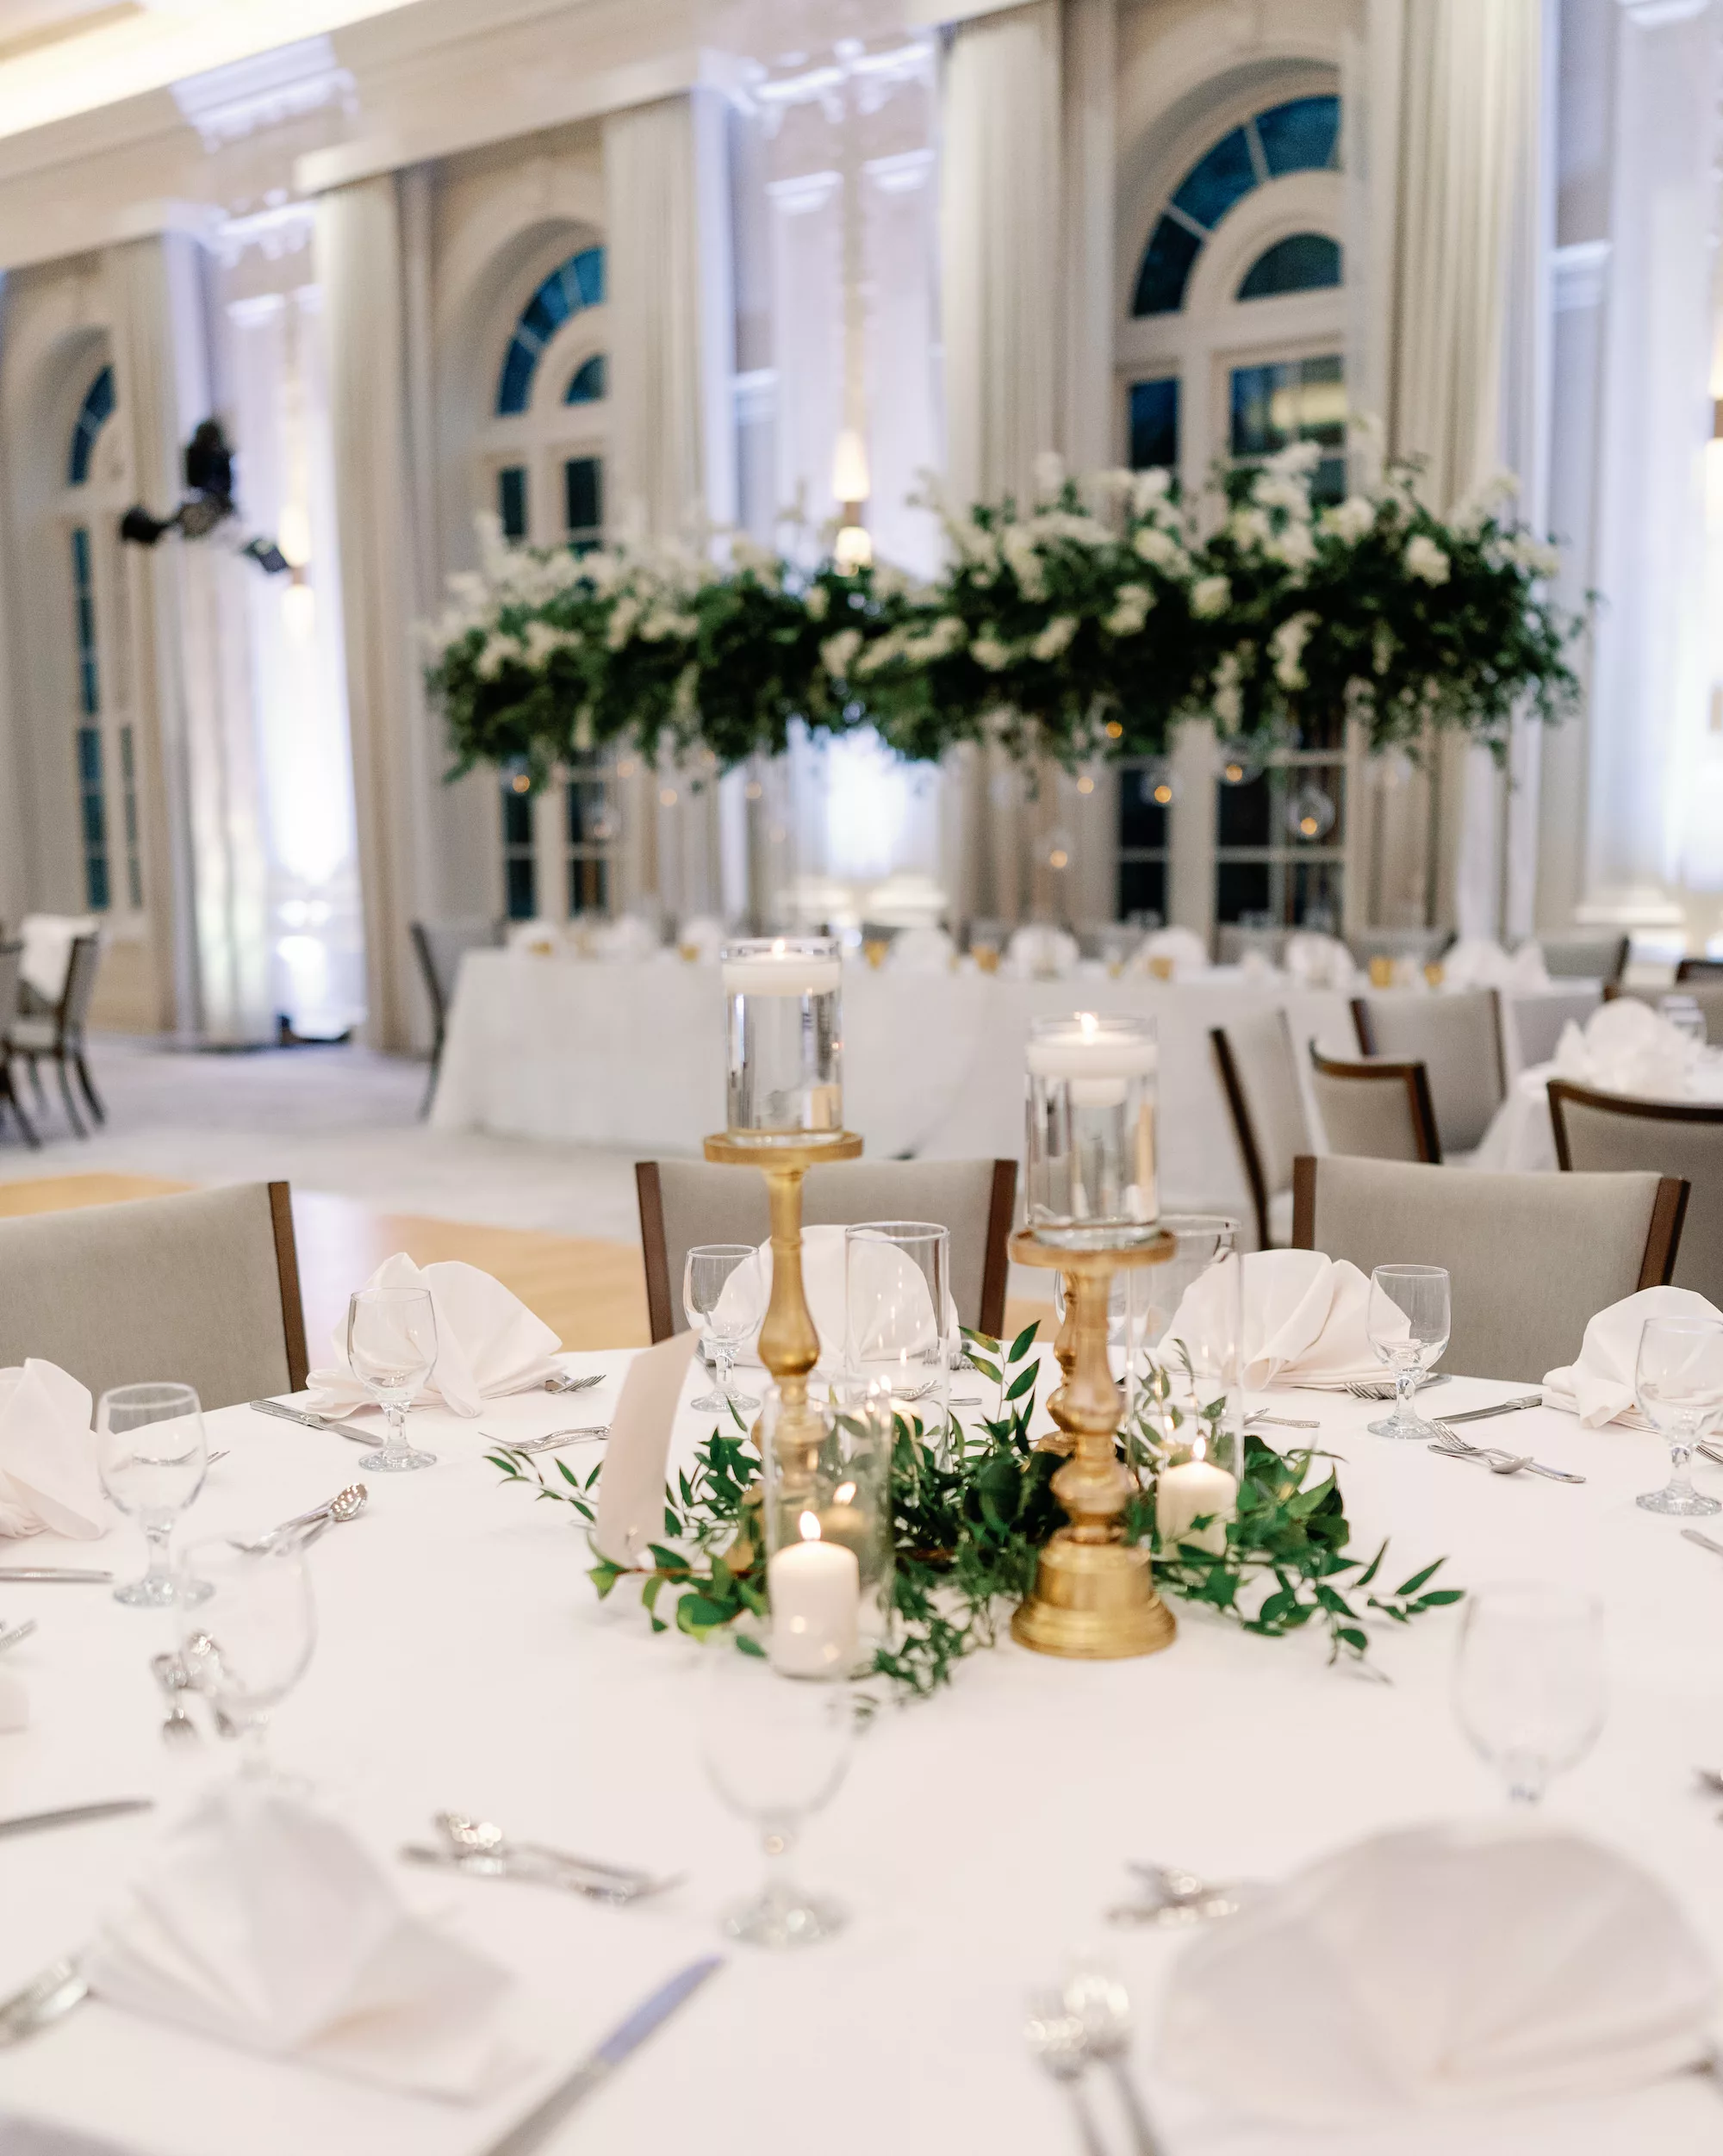 Luxurious White and Gold Grand Ballroom Wedding Reception Decor Ideas | Greenery Garland and Floating Candle Centerpiece Inspiration